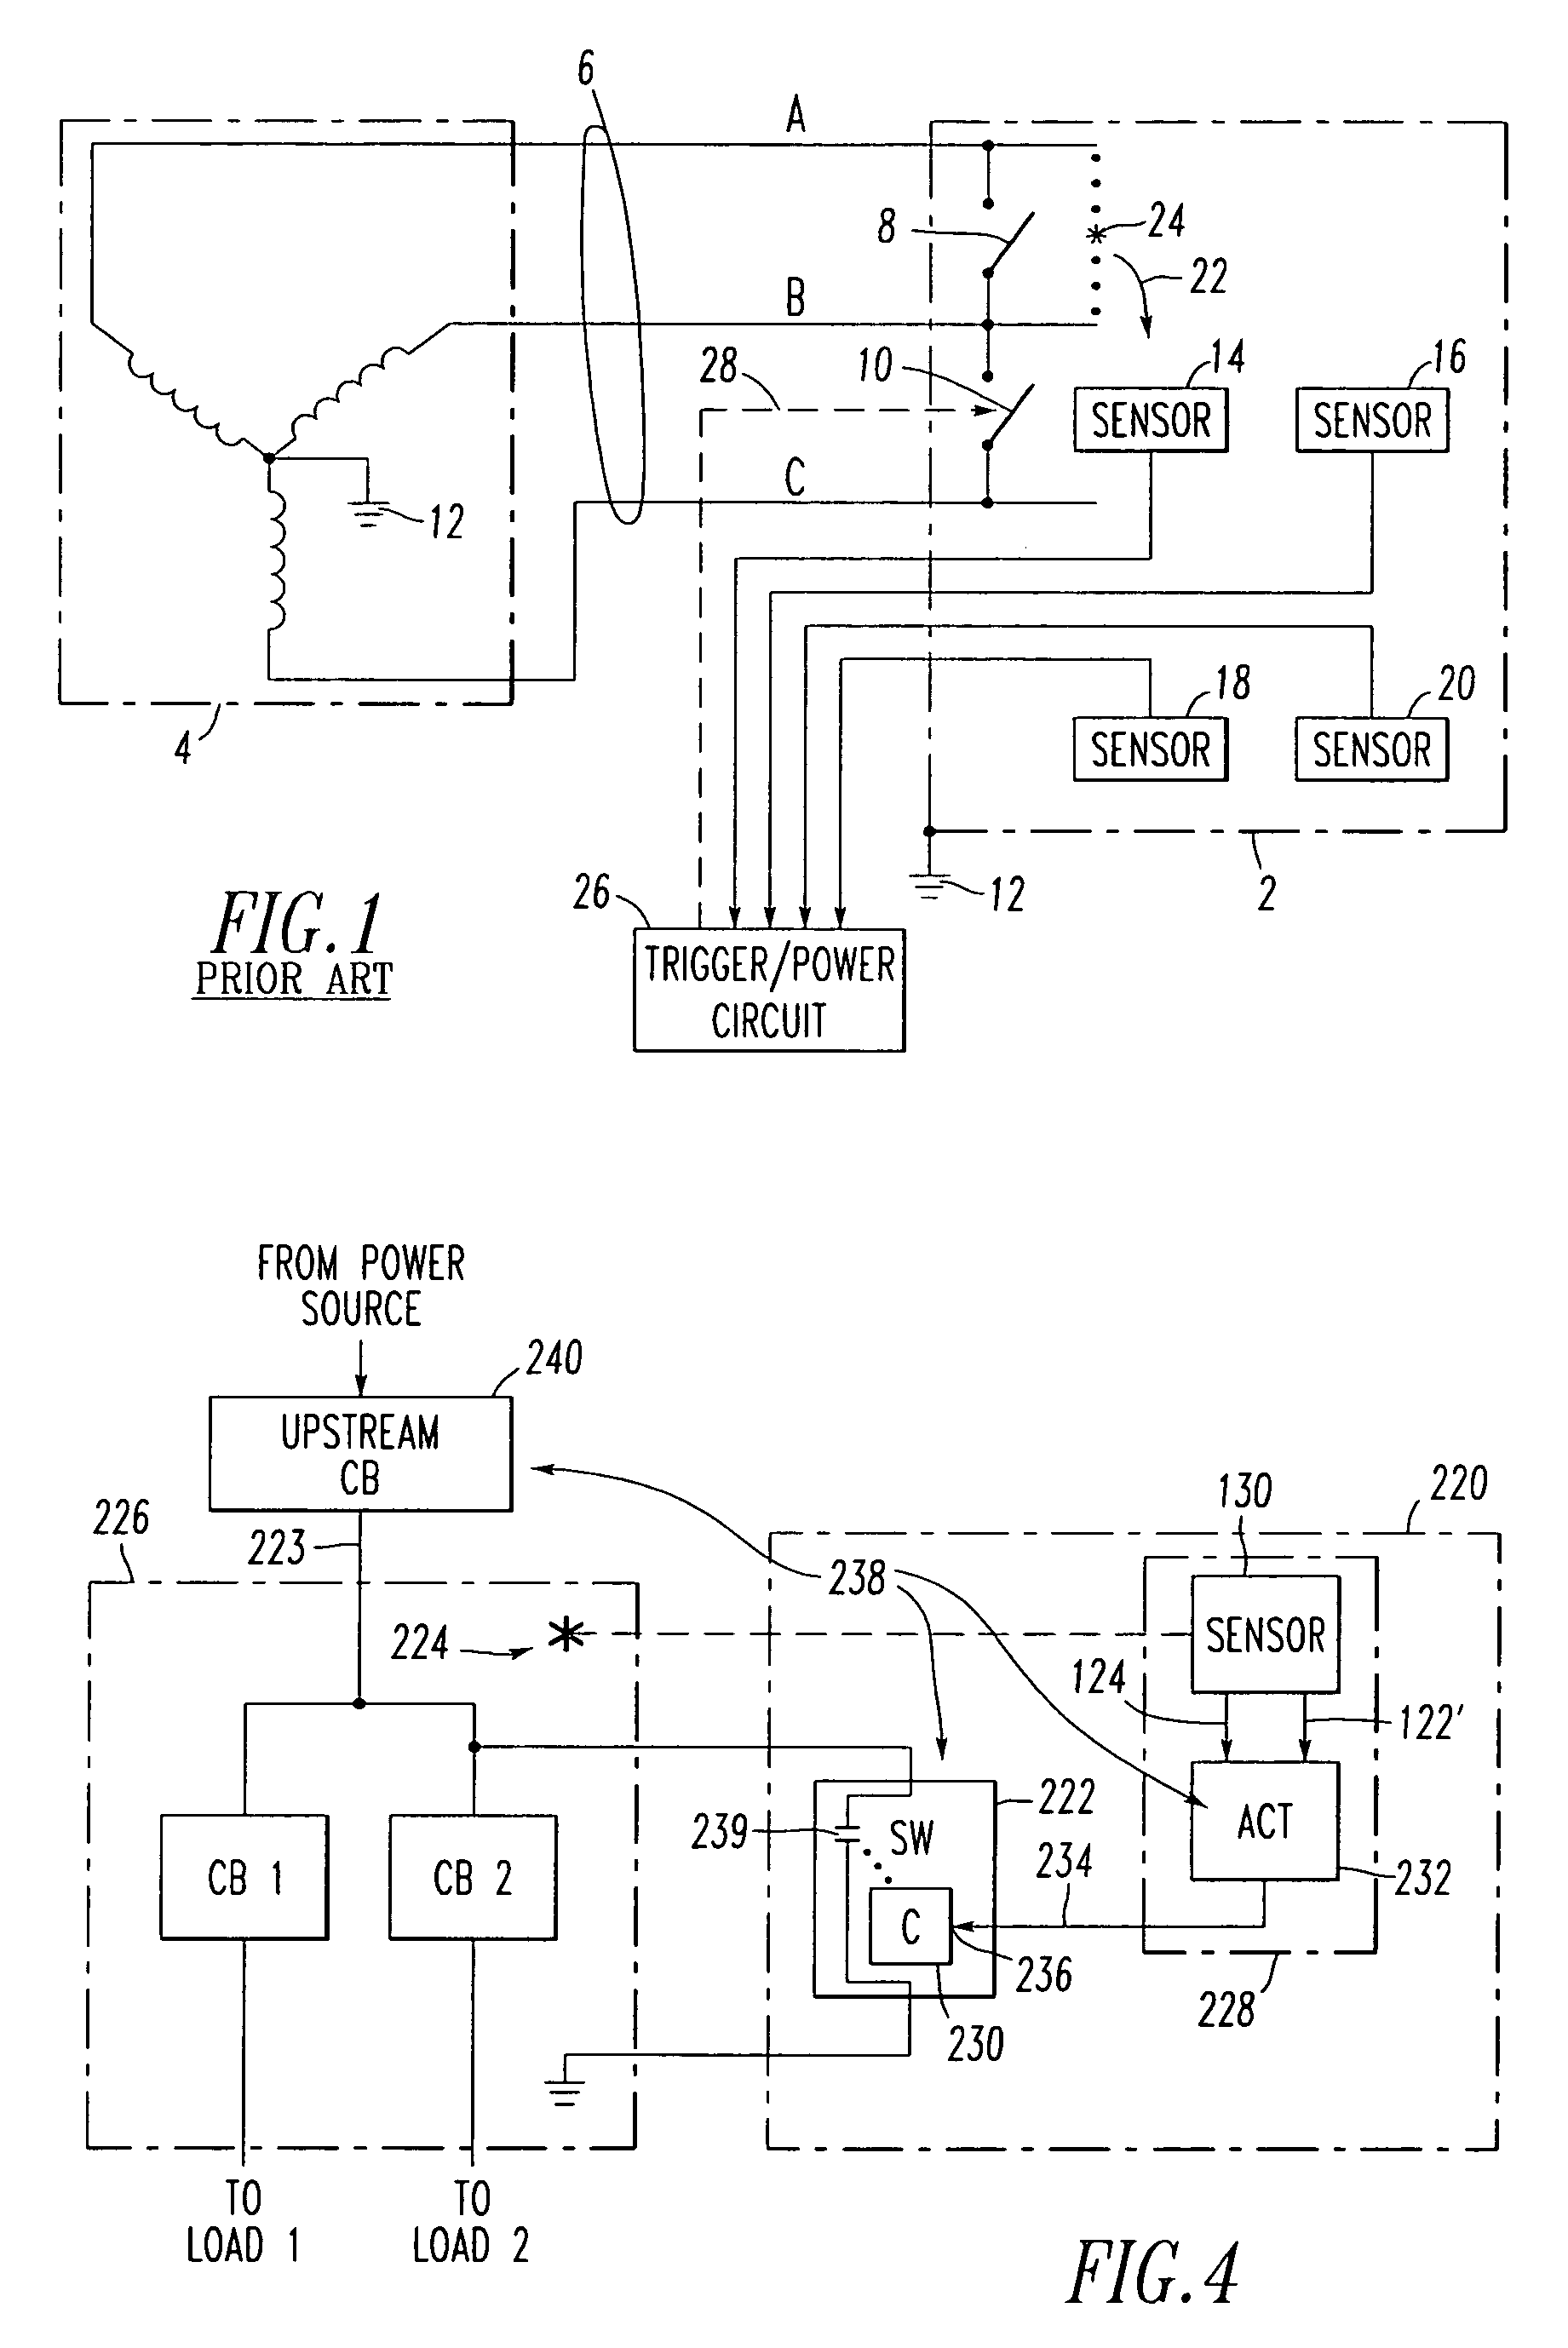 Apparatus and method employing an optical fiber for closed-loop feedback detection of arcing faults